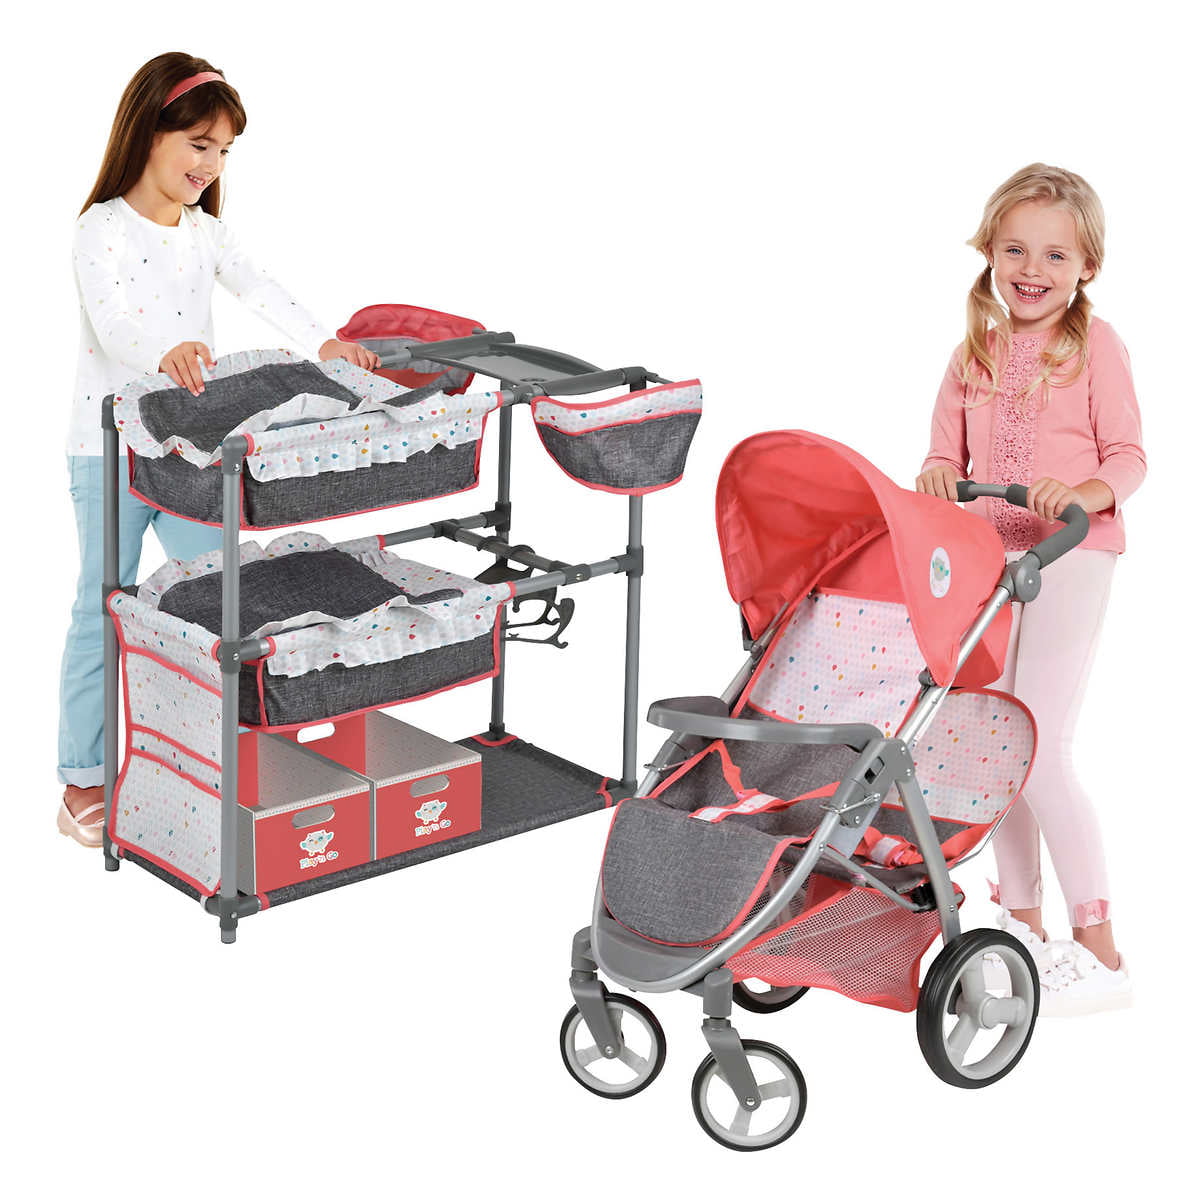 Duo Twin Foldable Stroller Pram Play for 2 Baby Dolls Up To 18" Kids Toy Gift 